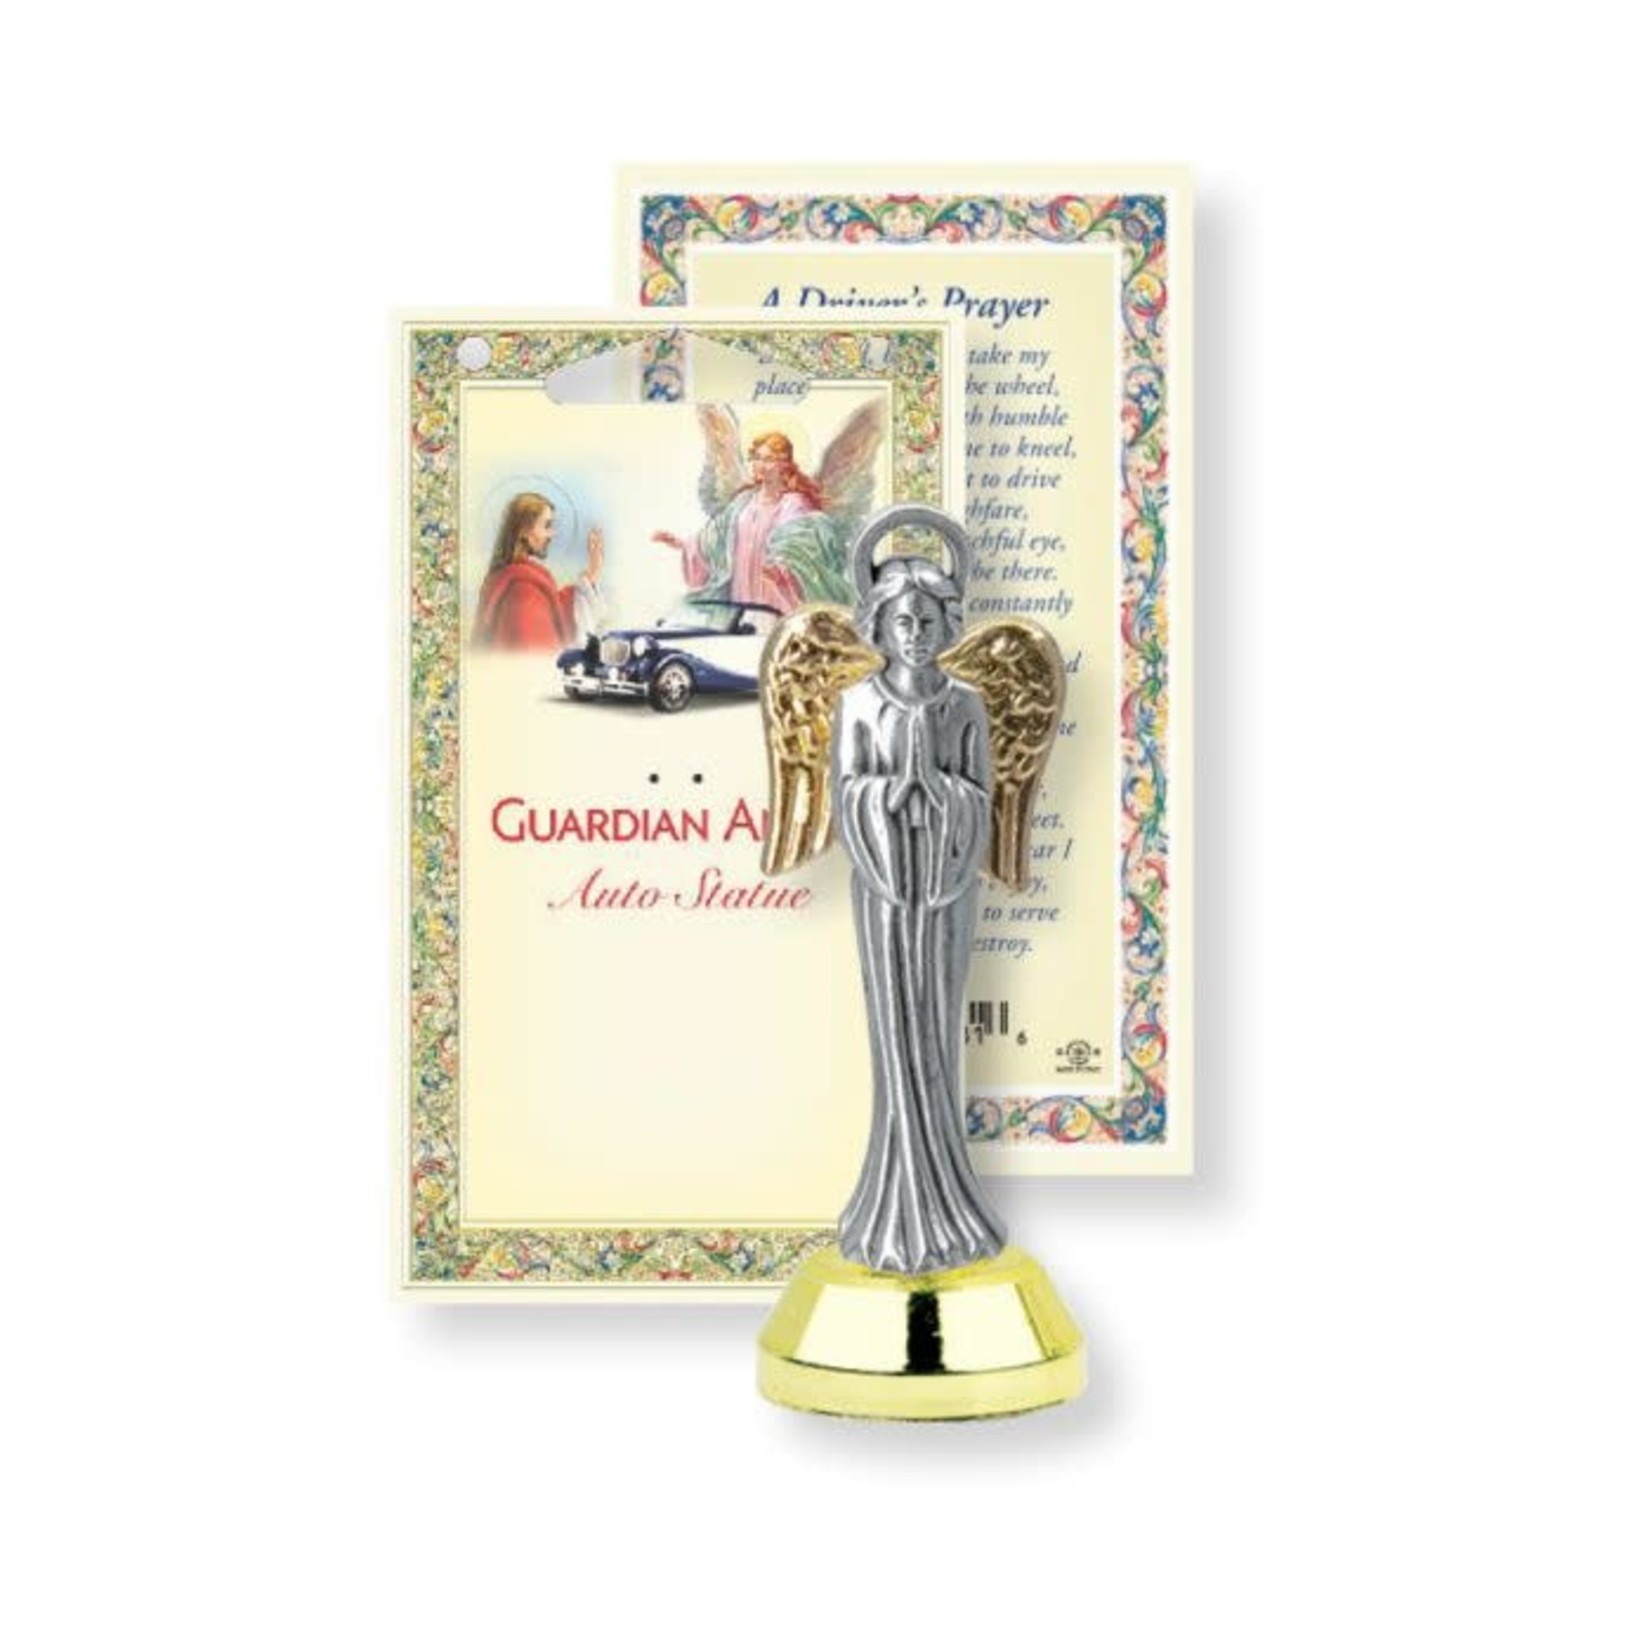 Guardian Angel Auto Statuette with Driver's Prayer